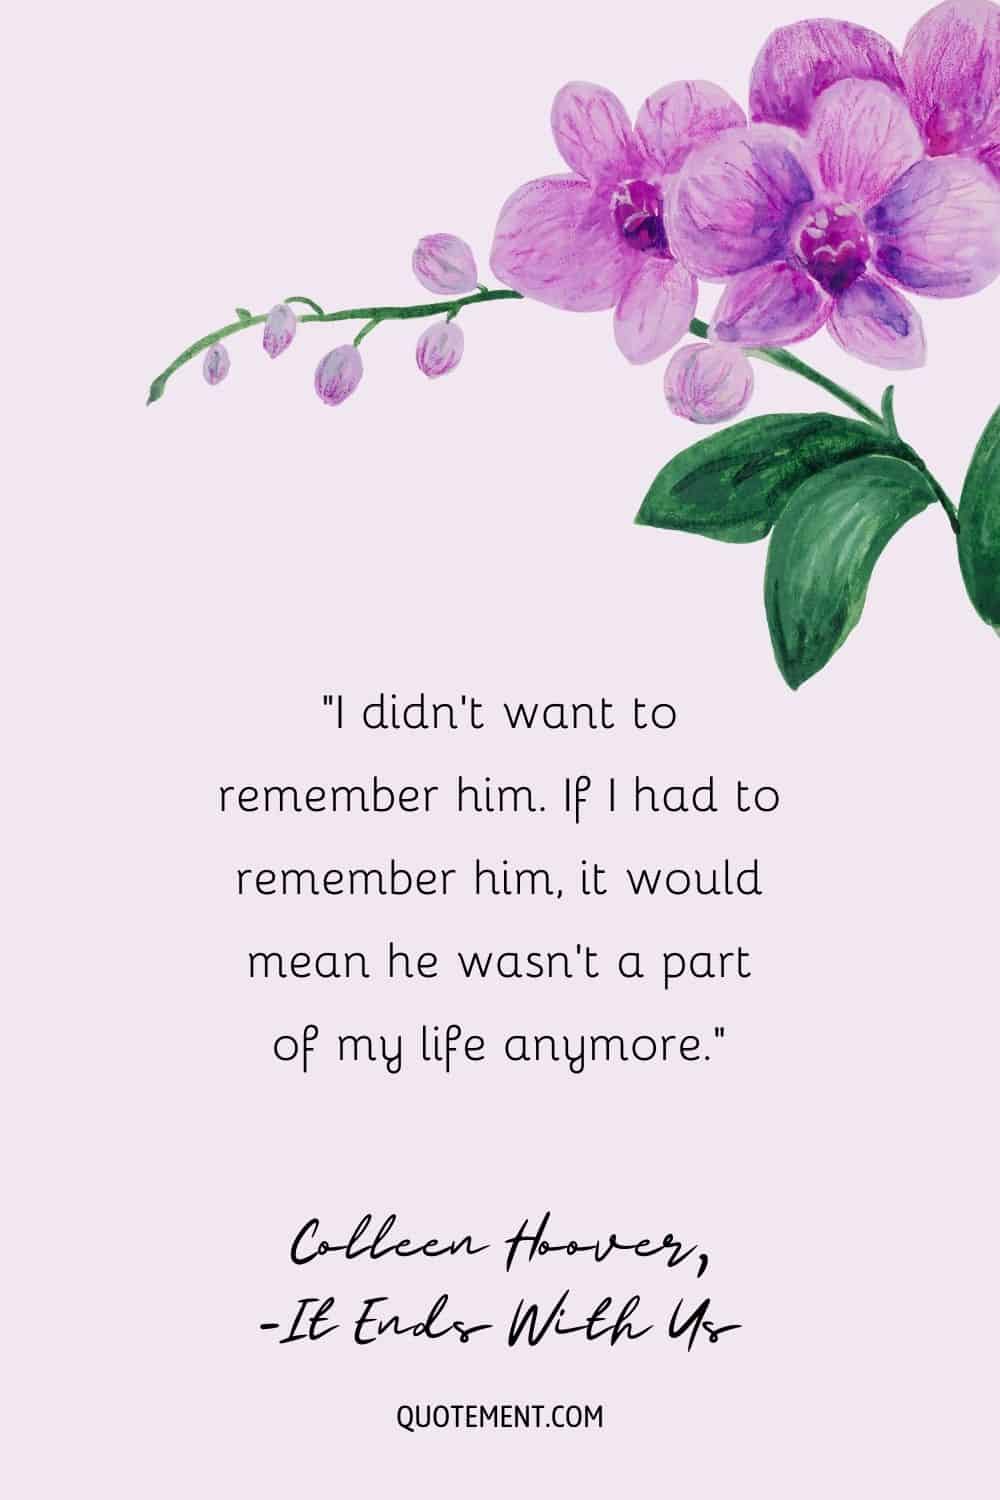 Deep breakup quote from It ends with us represented by pink flowers illustration.
